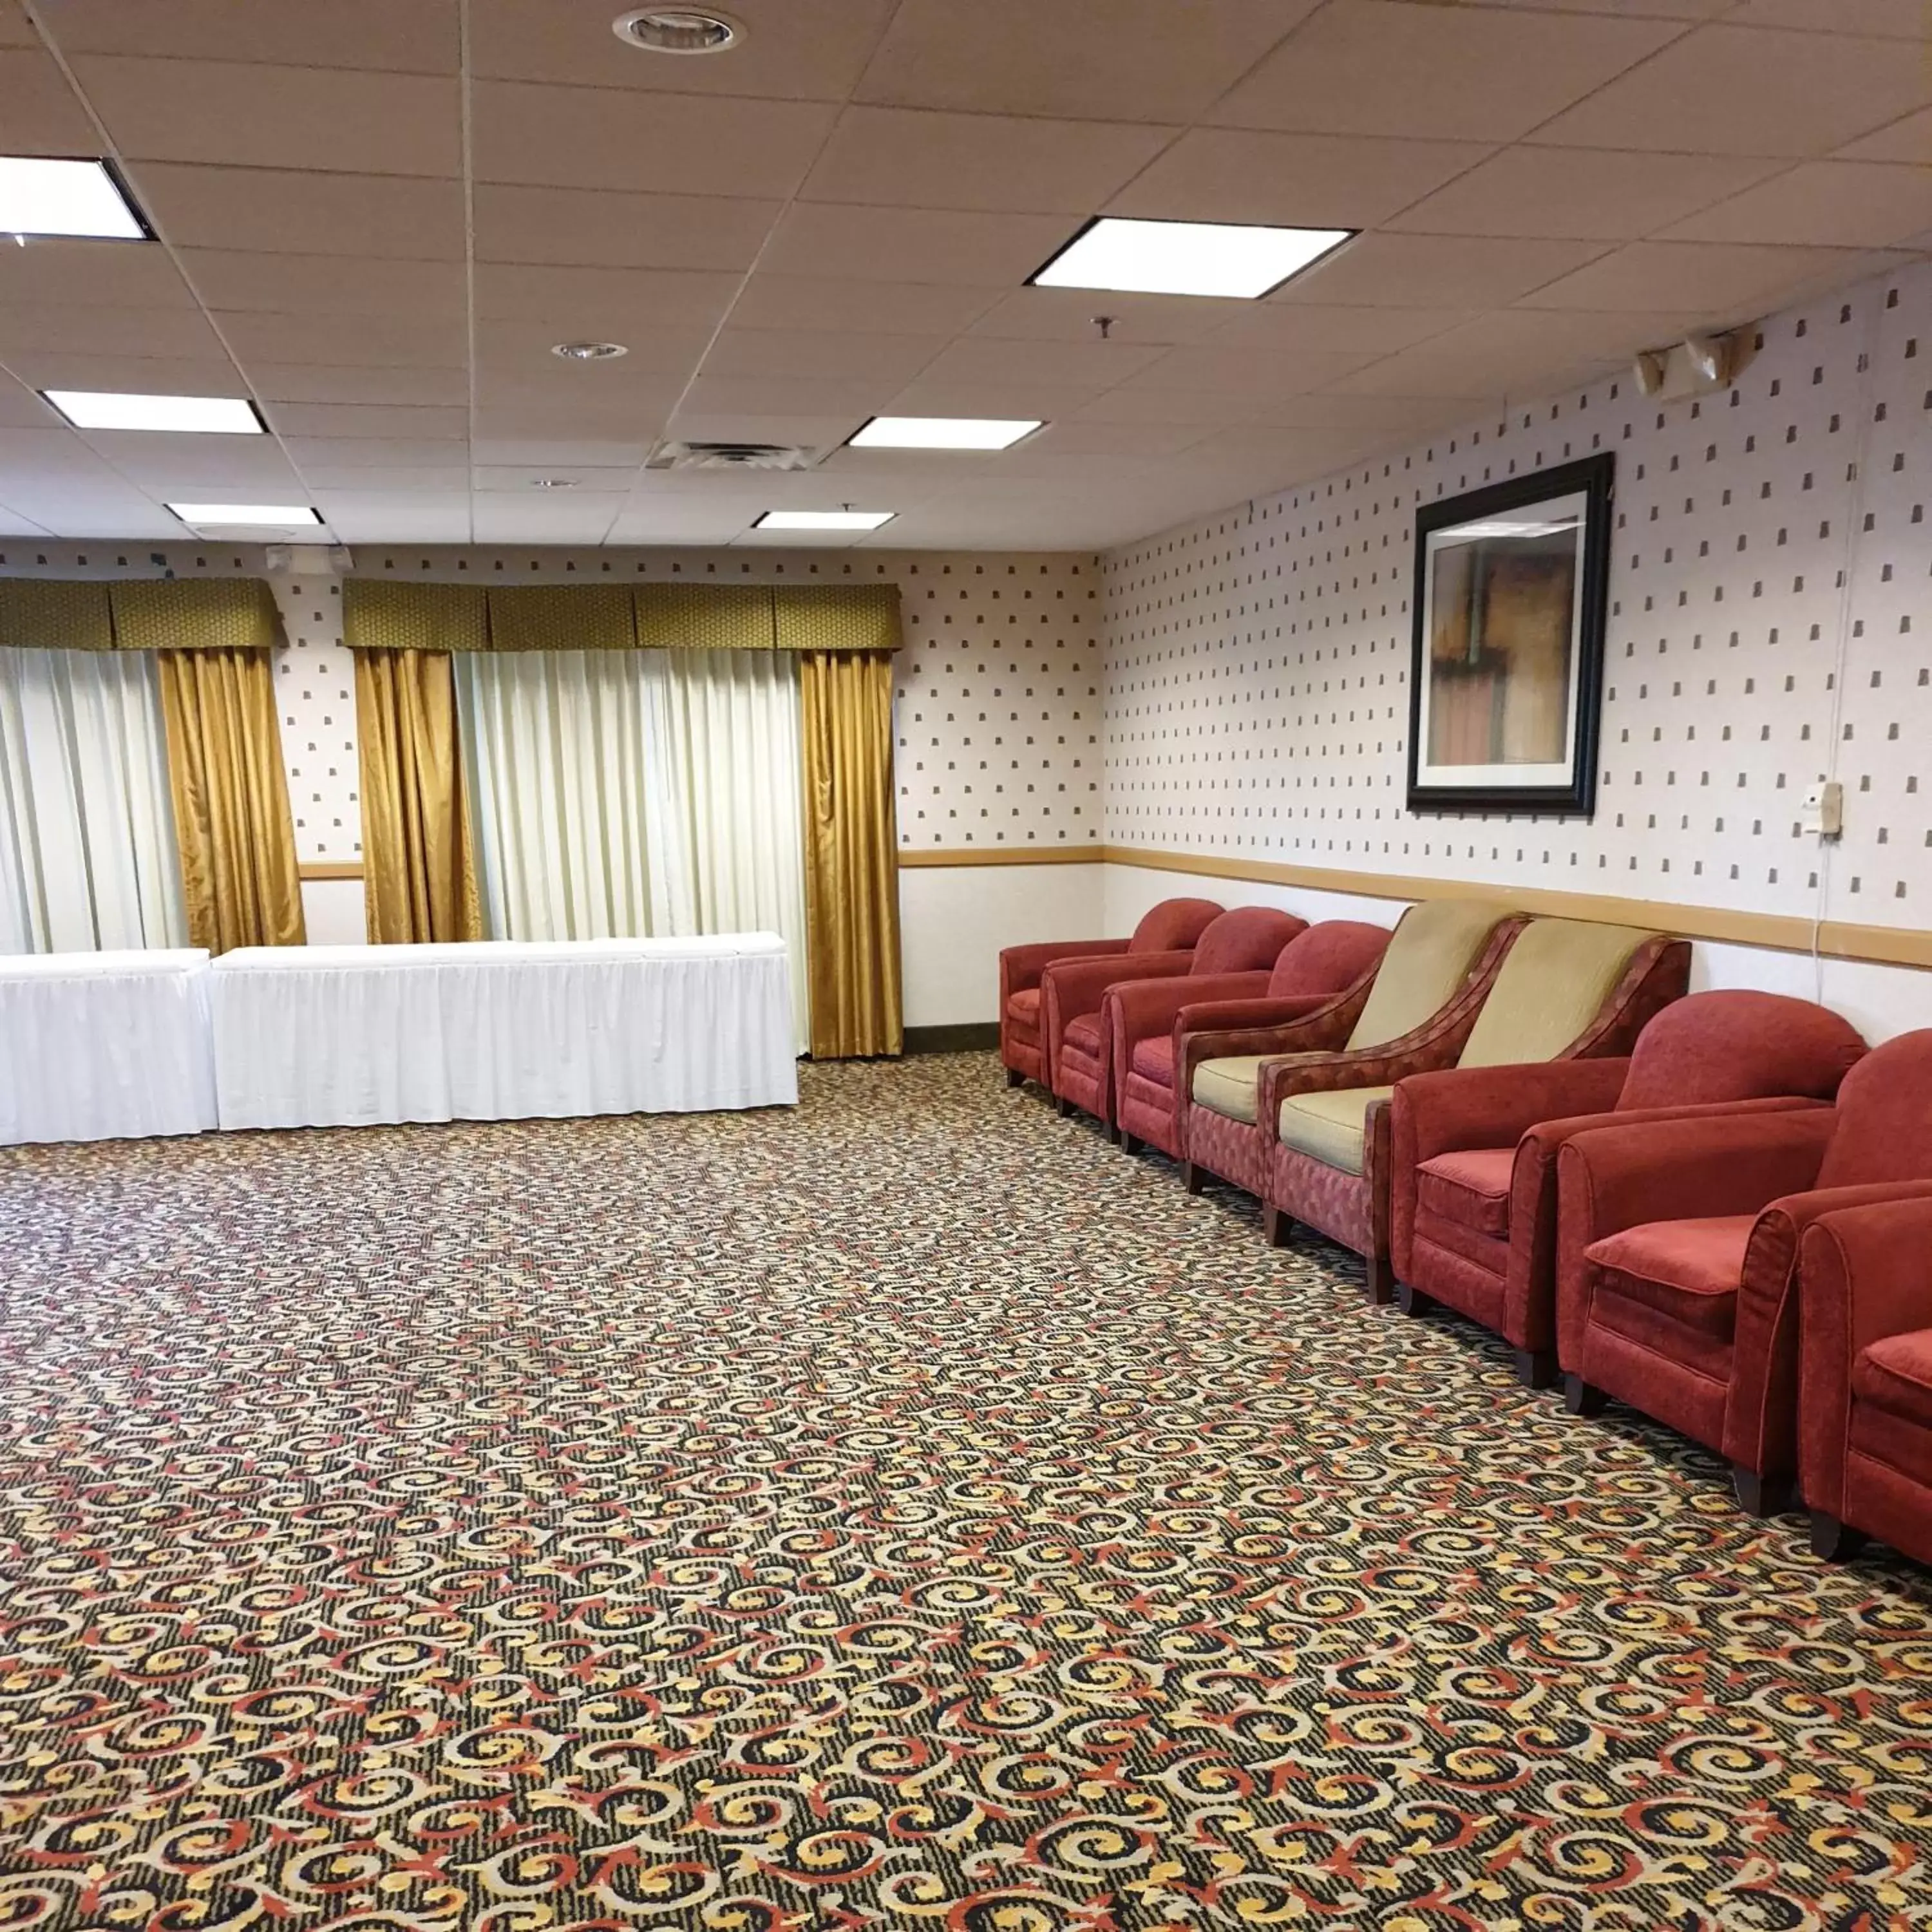 Banquet Facilities in Hawthorn Suites by Wyndham - Kingsland, I-95 & Kings Bay Naval Base Area